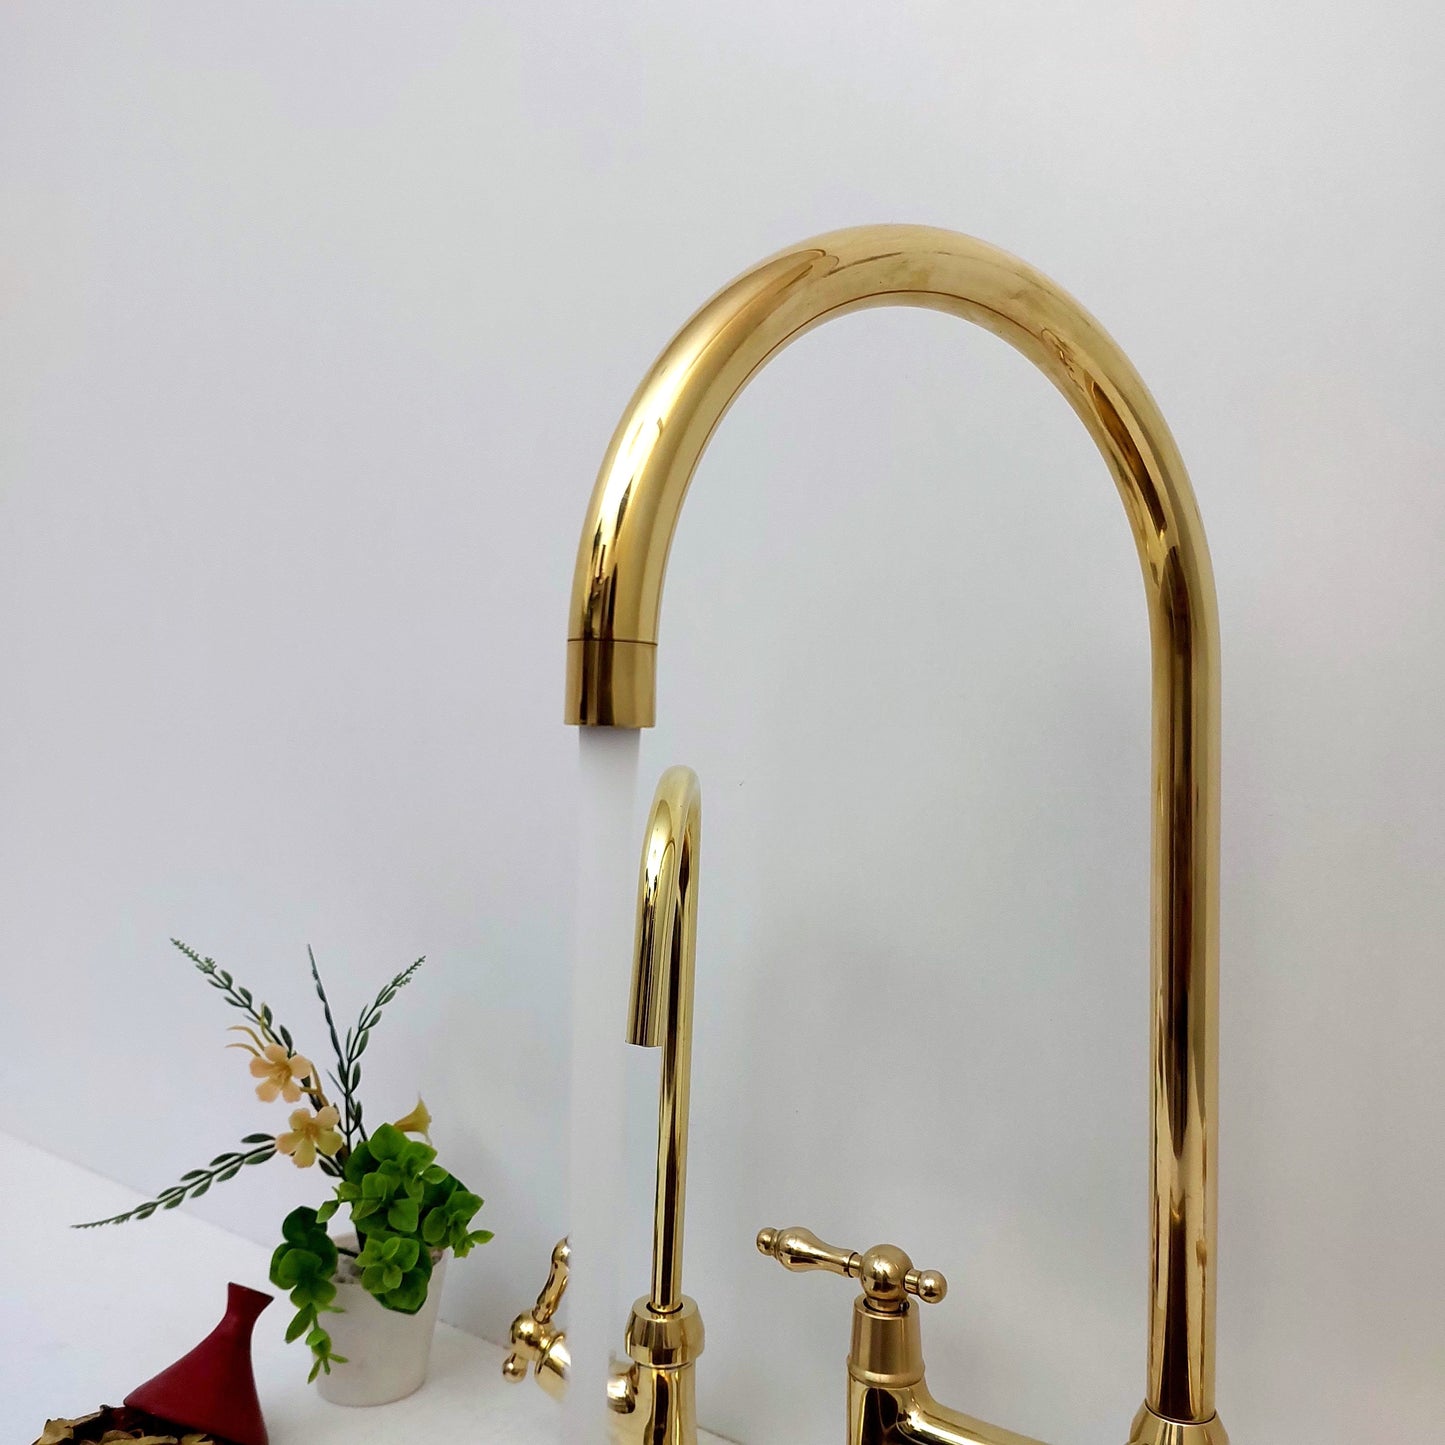 Unlacquered Brass Bridge Kitchen Faucet With Ball Center, Sprayer, Cold Water Tap, And Lever Handles - Ref: APL-5